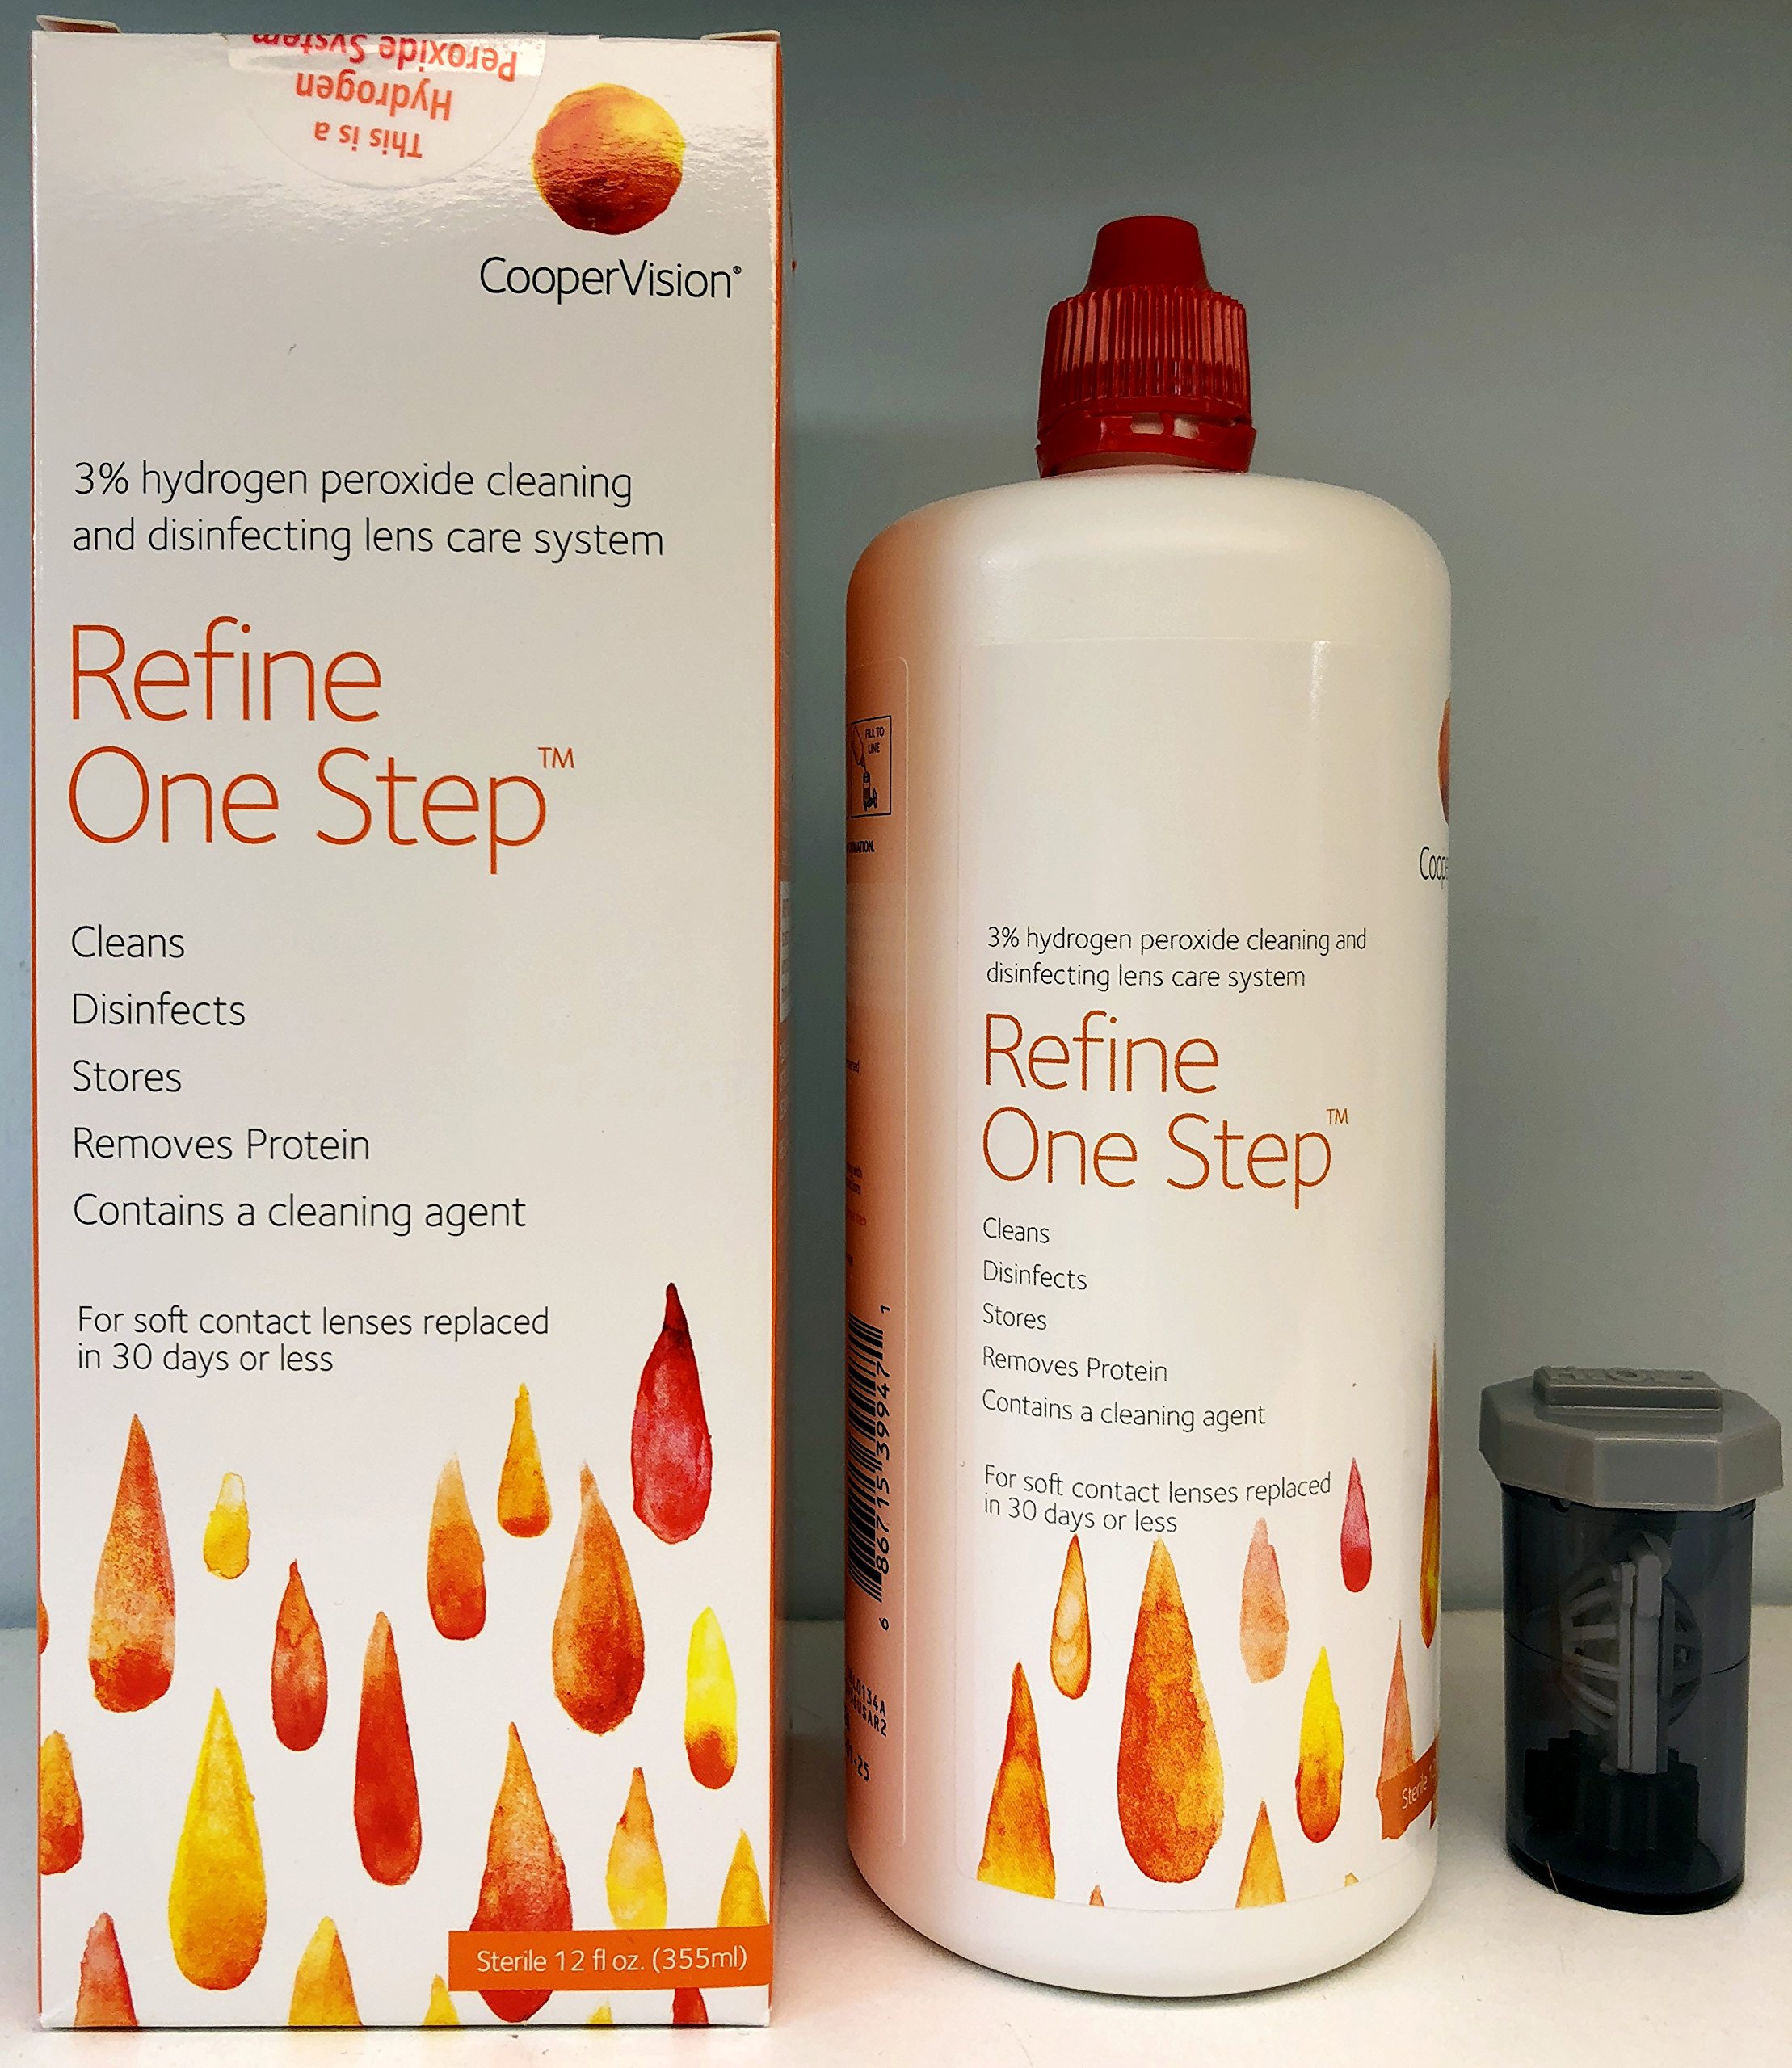 One step купить. Refine one Step 360. One Step Peroxide. Cooper Vision Peroxide one Step. One Step Peroxide solution.